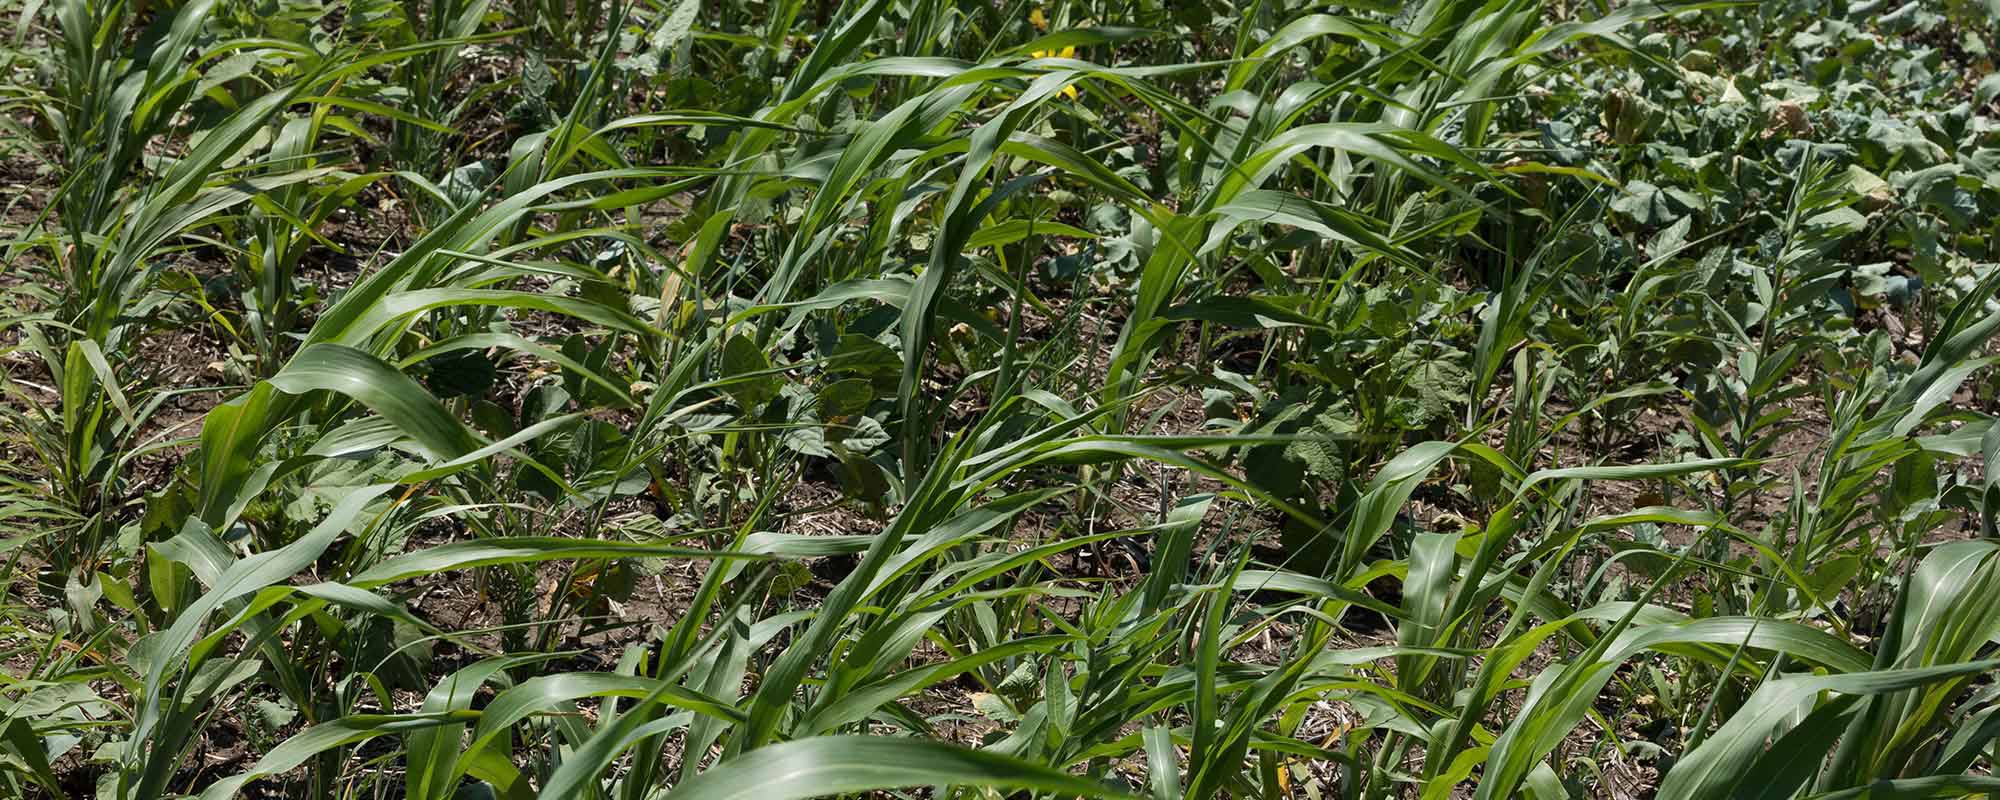 Cover Crops: A Tool in Agricultural Production